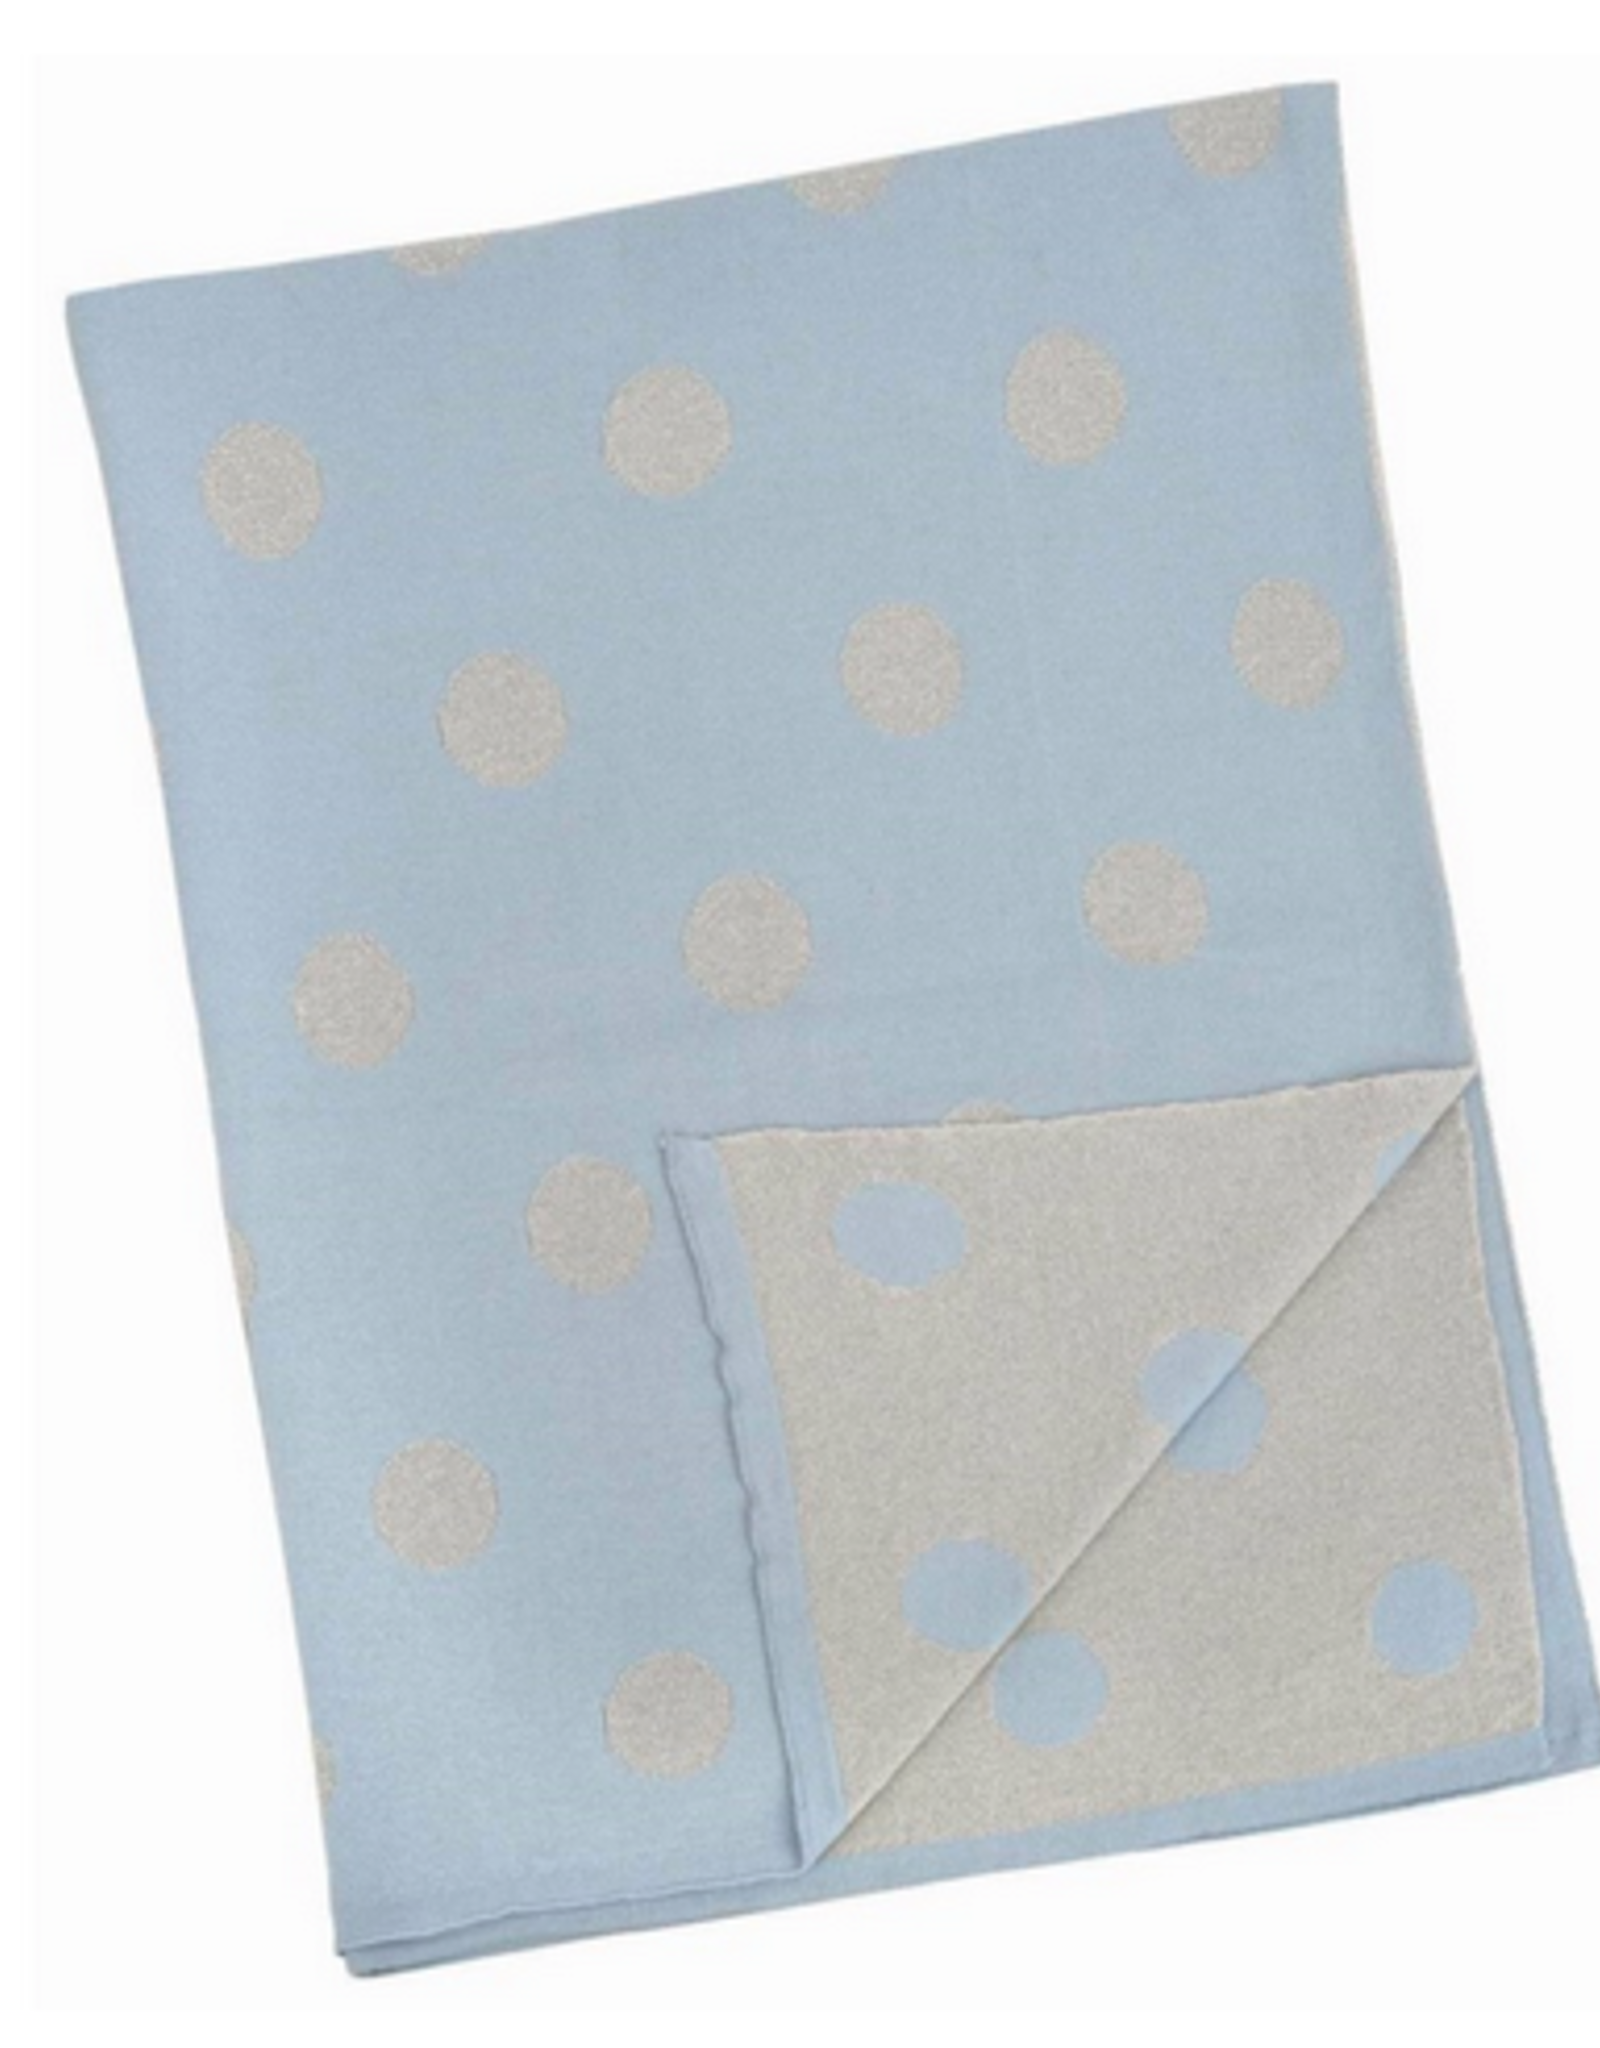 Blue and Silver Polka Dot Baby Blanket L30" W40"